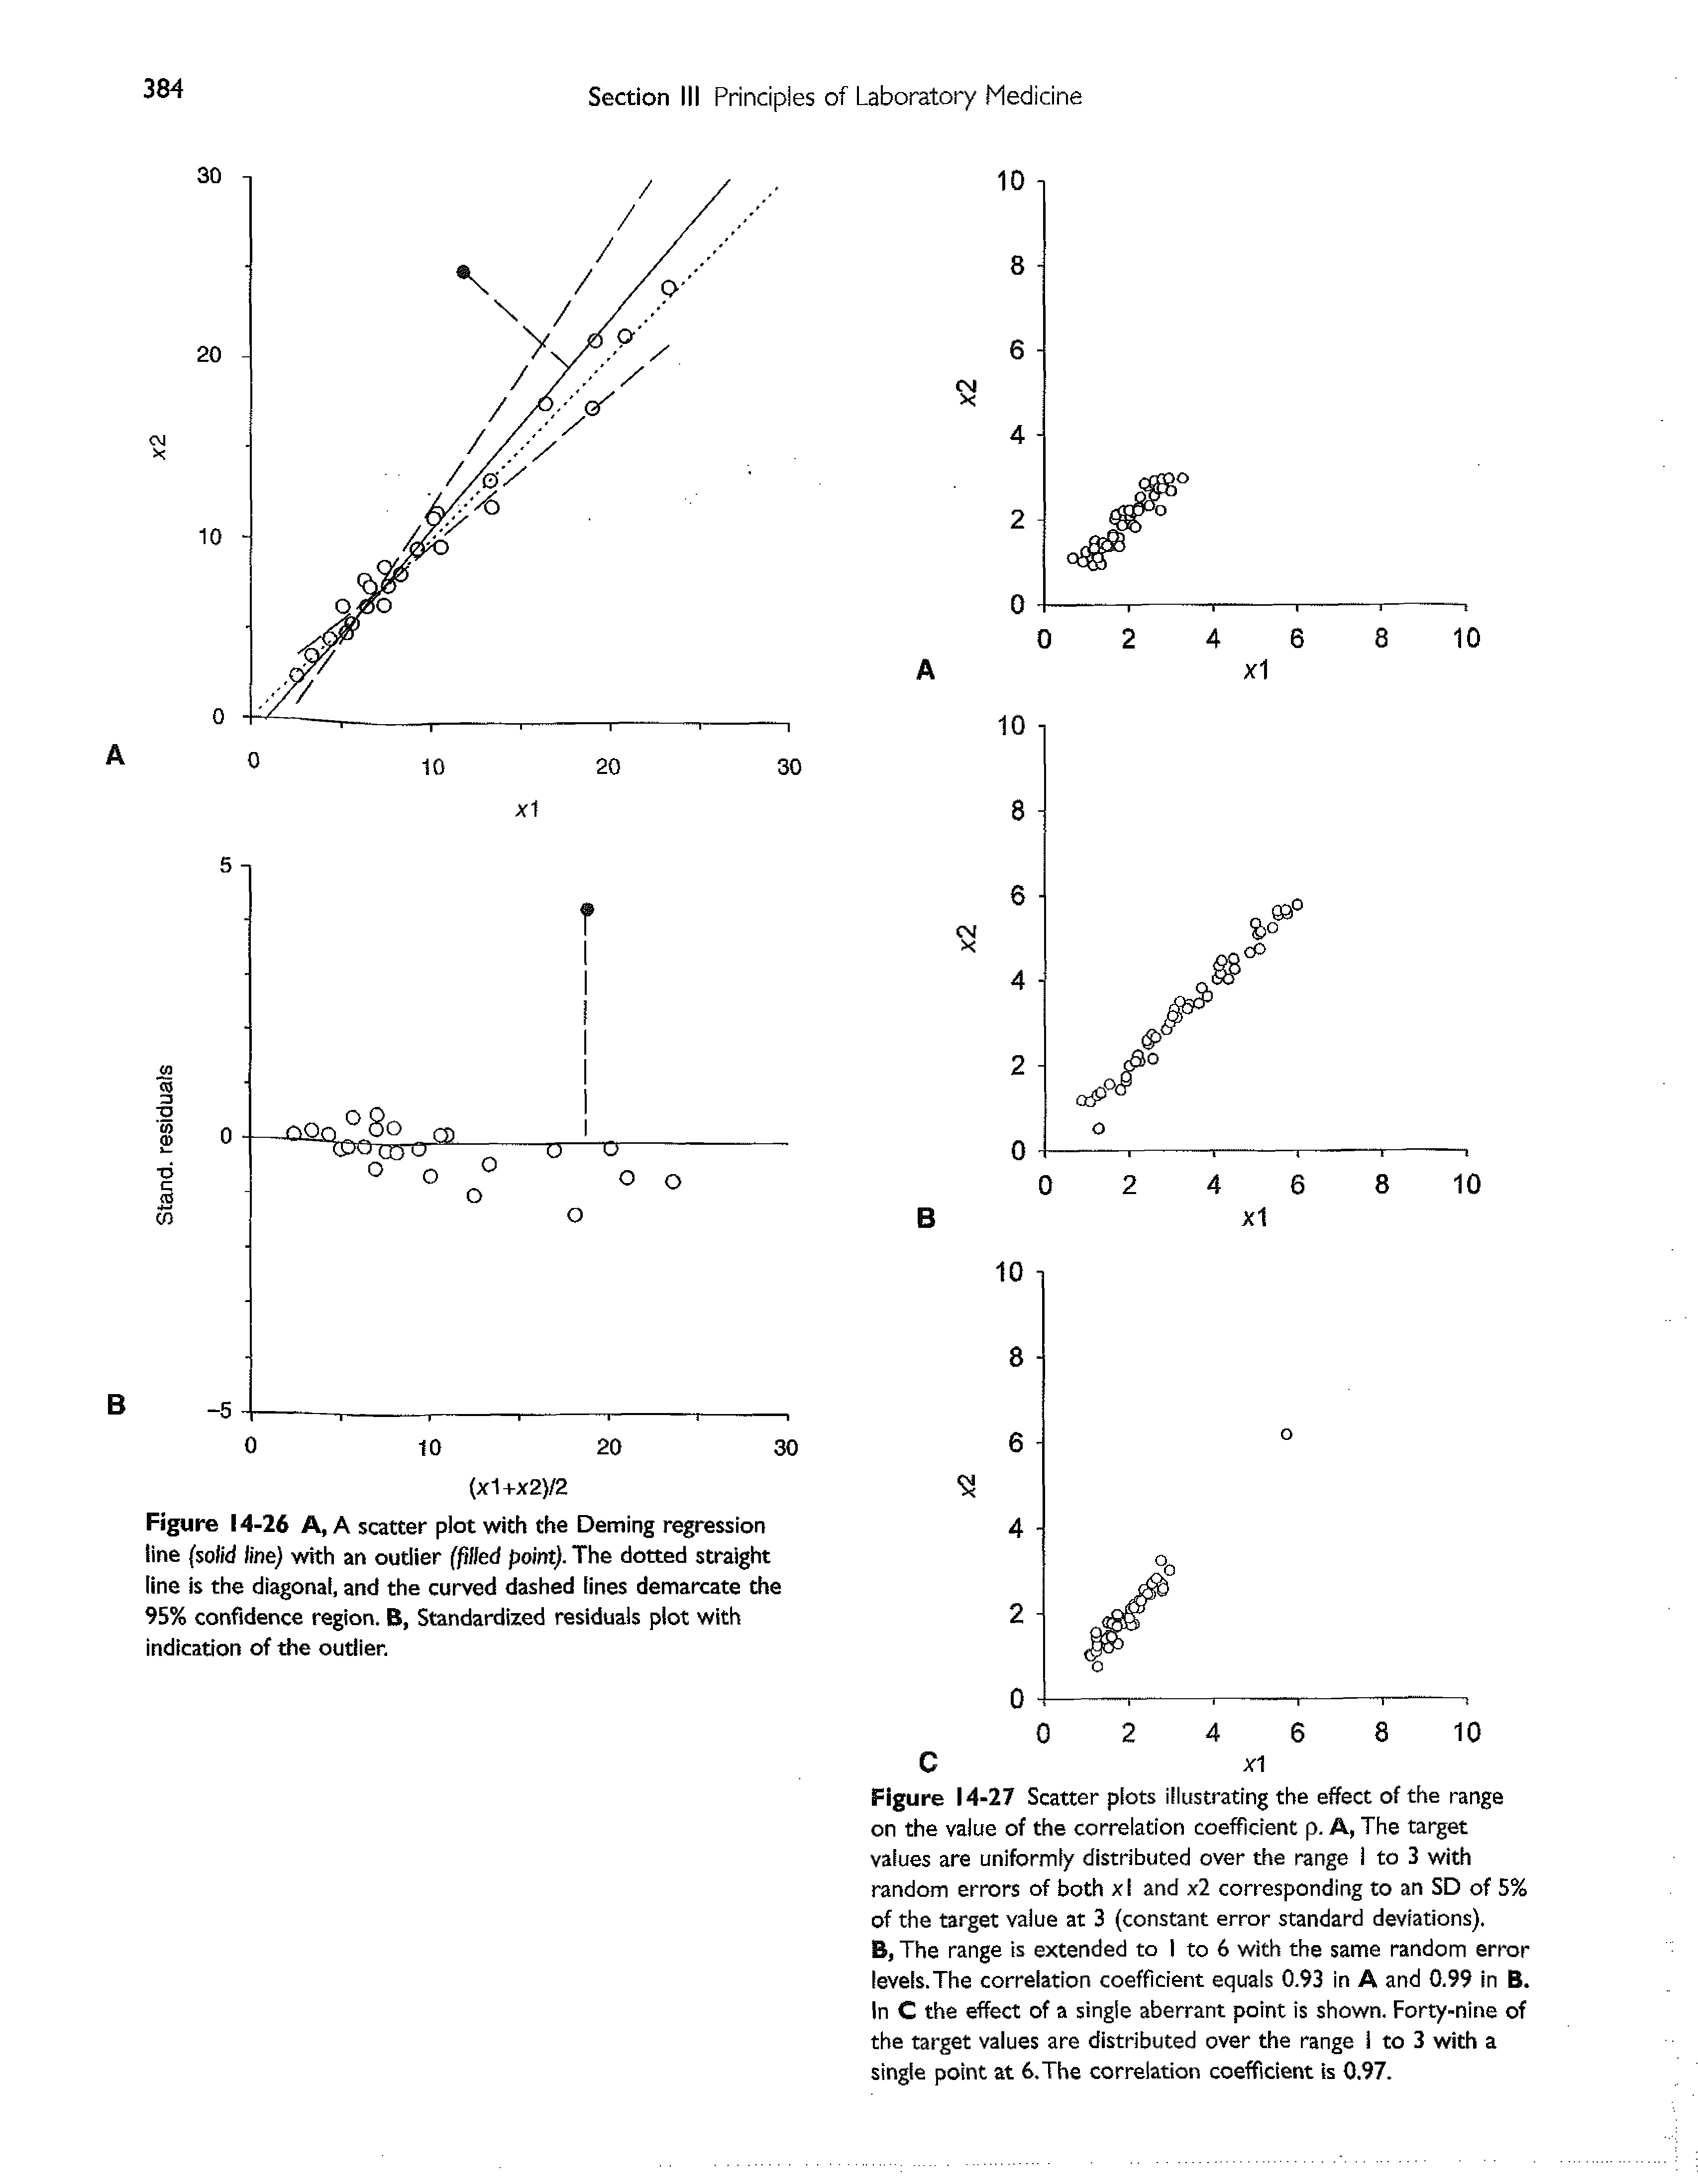 Figure 14-27 Scatter plots illustrating the effect of the range on the value of the correlation coefficient p. A, The target values are uniformly distributed over the range I to 3 with random errors of both xl and x2 corresponding to an SD of 5% of the target value at 3 (constant error standard deviations).